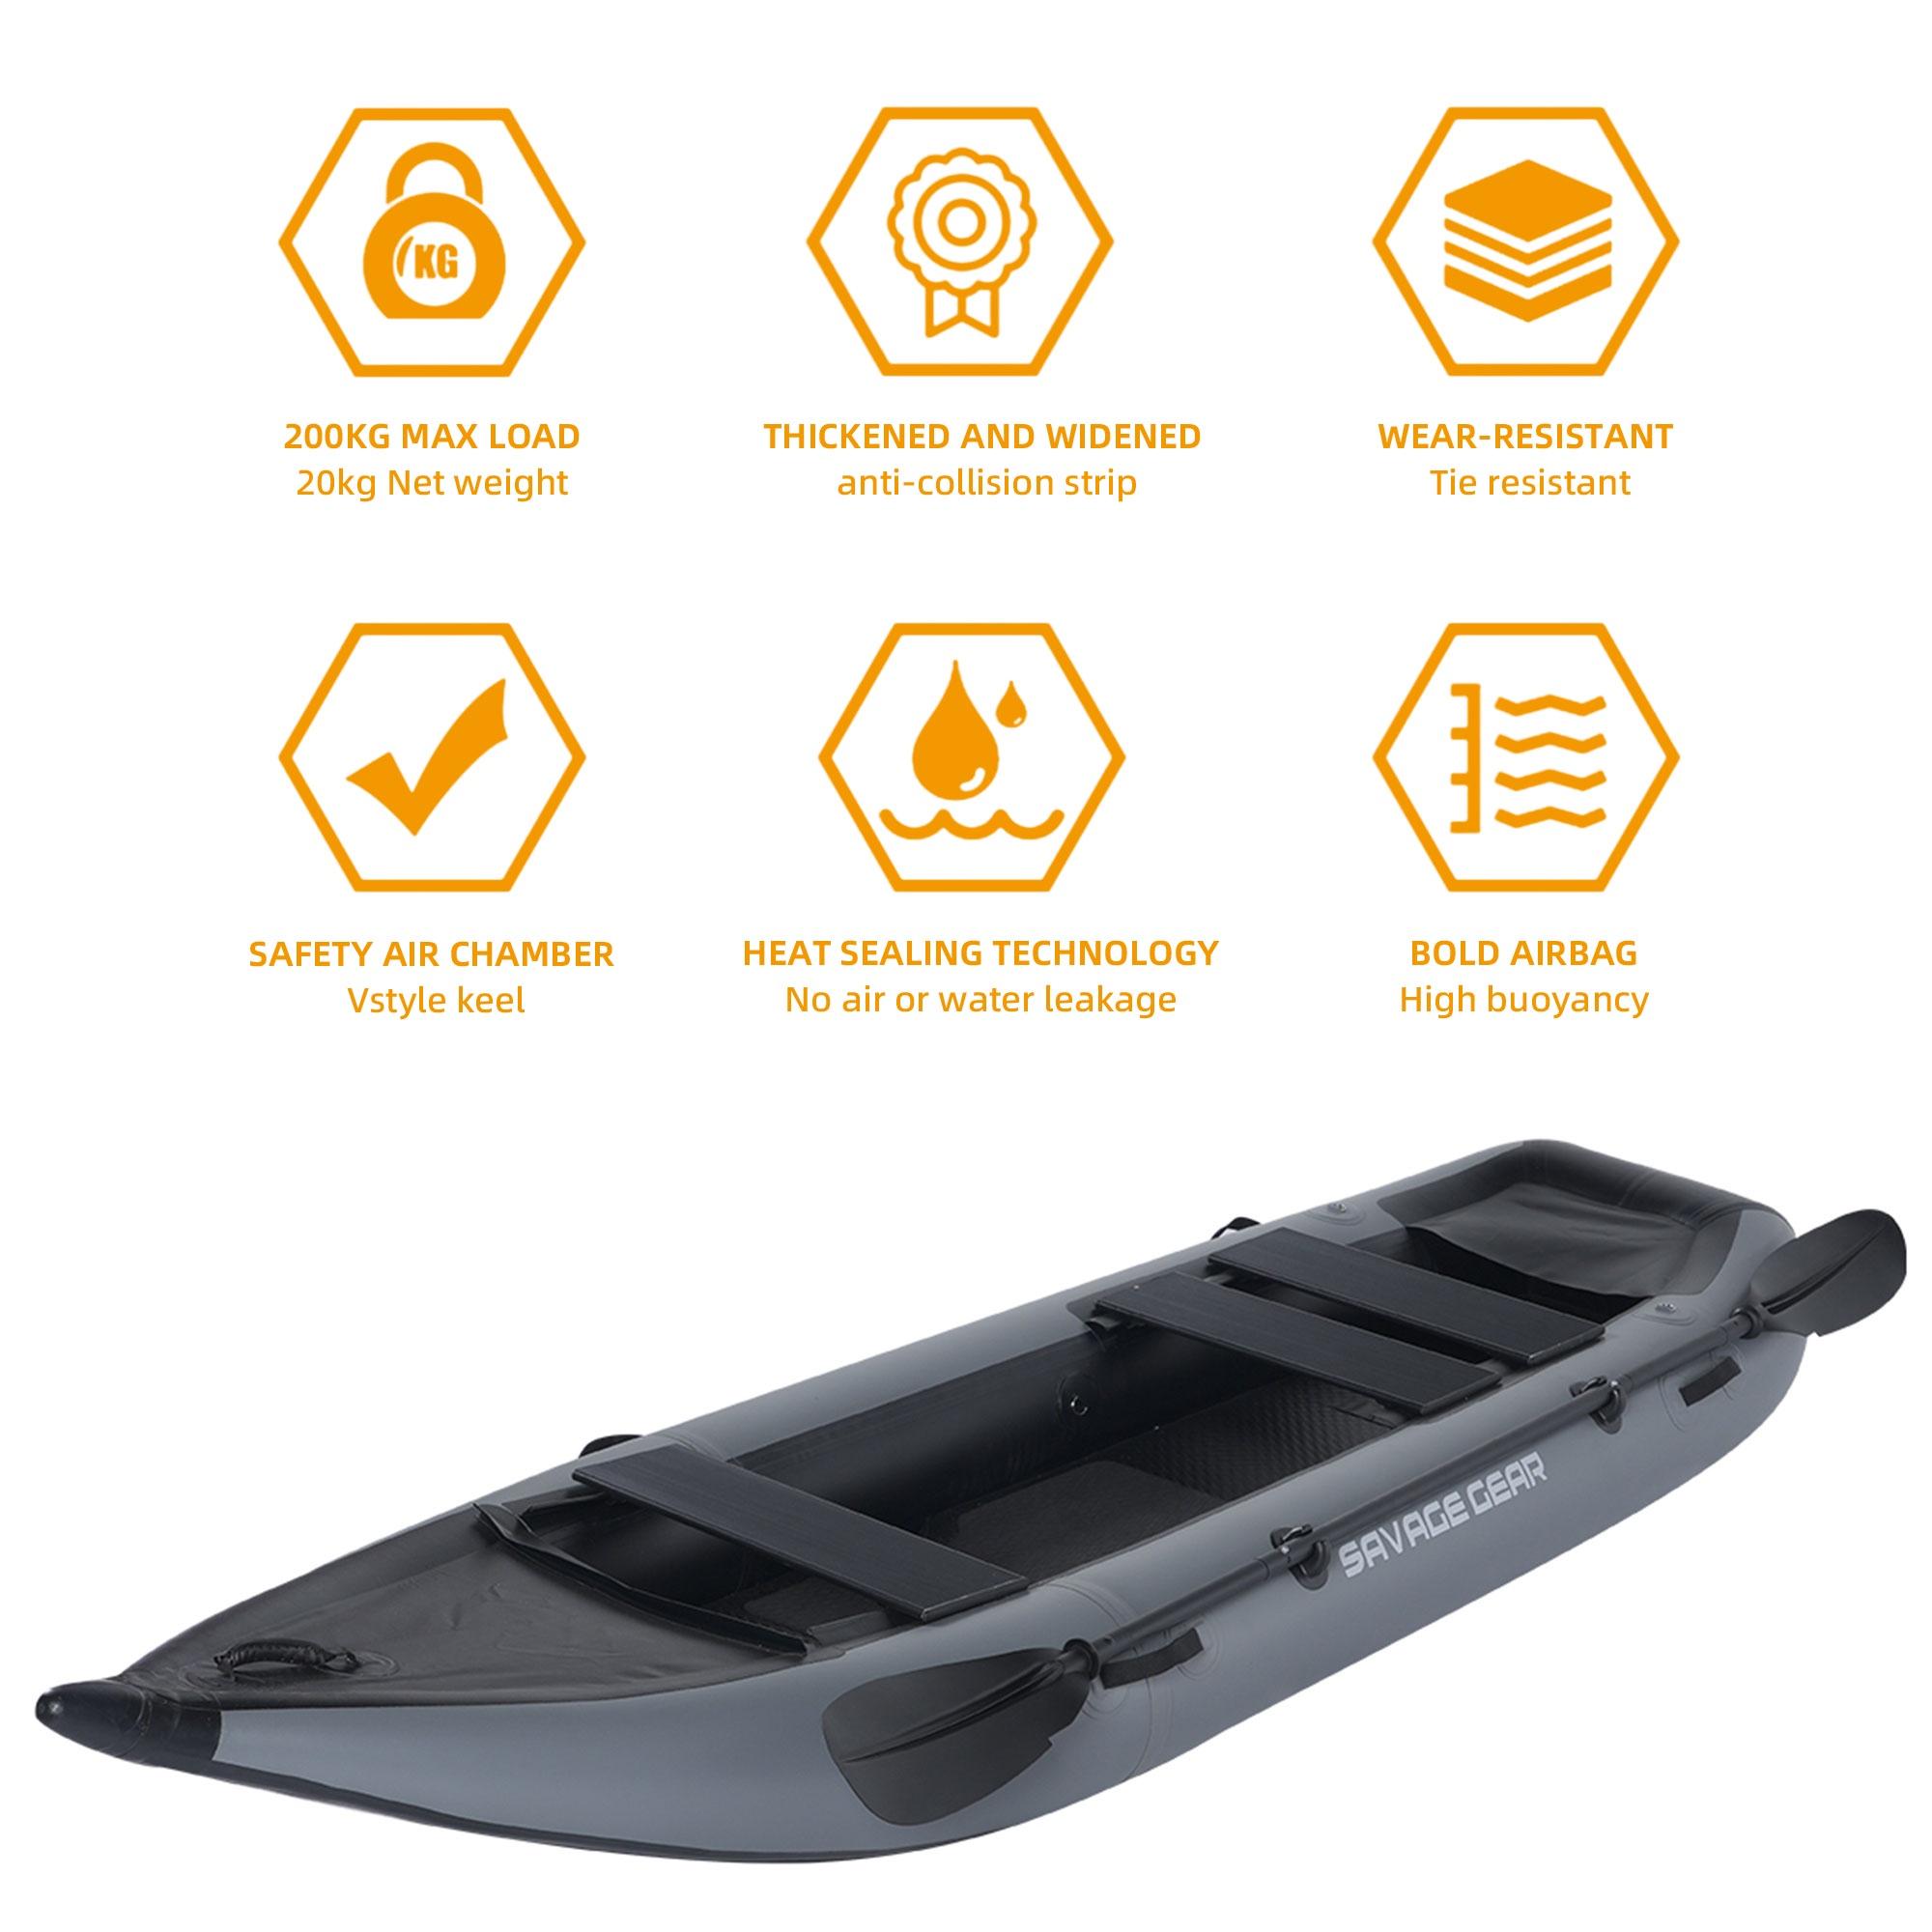 2 Person Inflatable Kayak, Fishing PVC Kayak Boat, Inflatable Boat Rescue Rubber Rowing Boat with Pump, Aluminum Alloy Seat, Paddle, Inflatable Mat, Repair Kit, Fin 440lb Weight Capacity - image 4 of 10